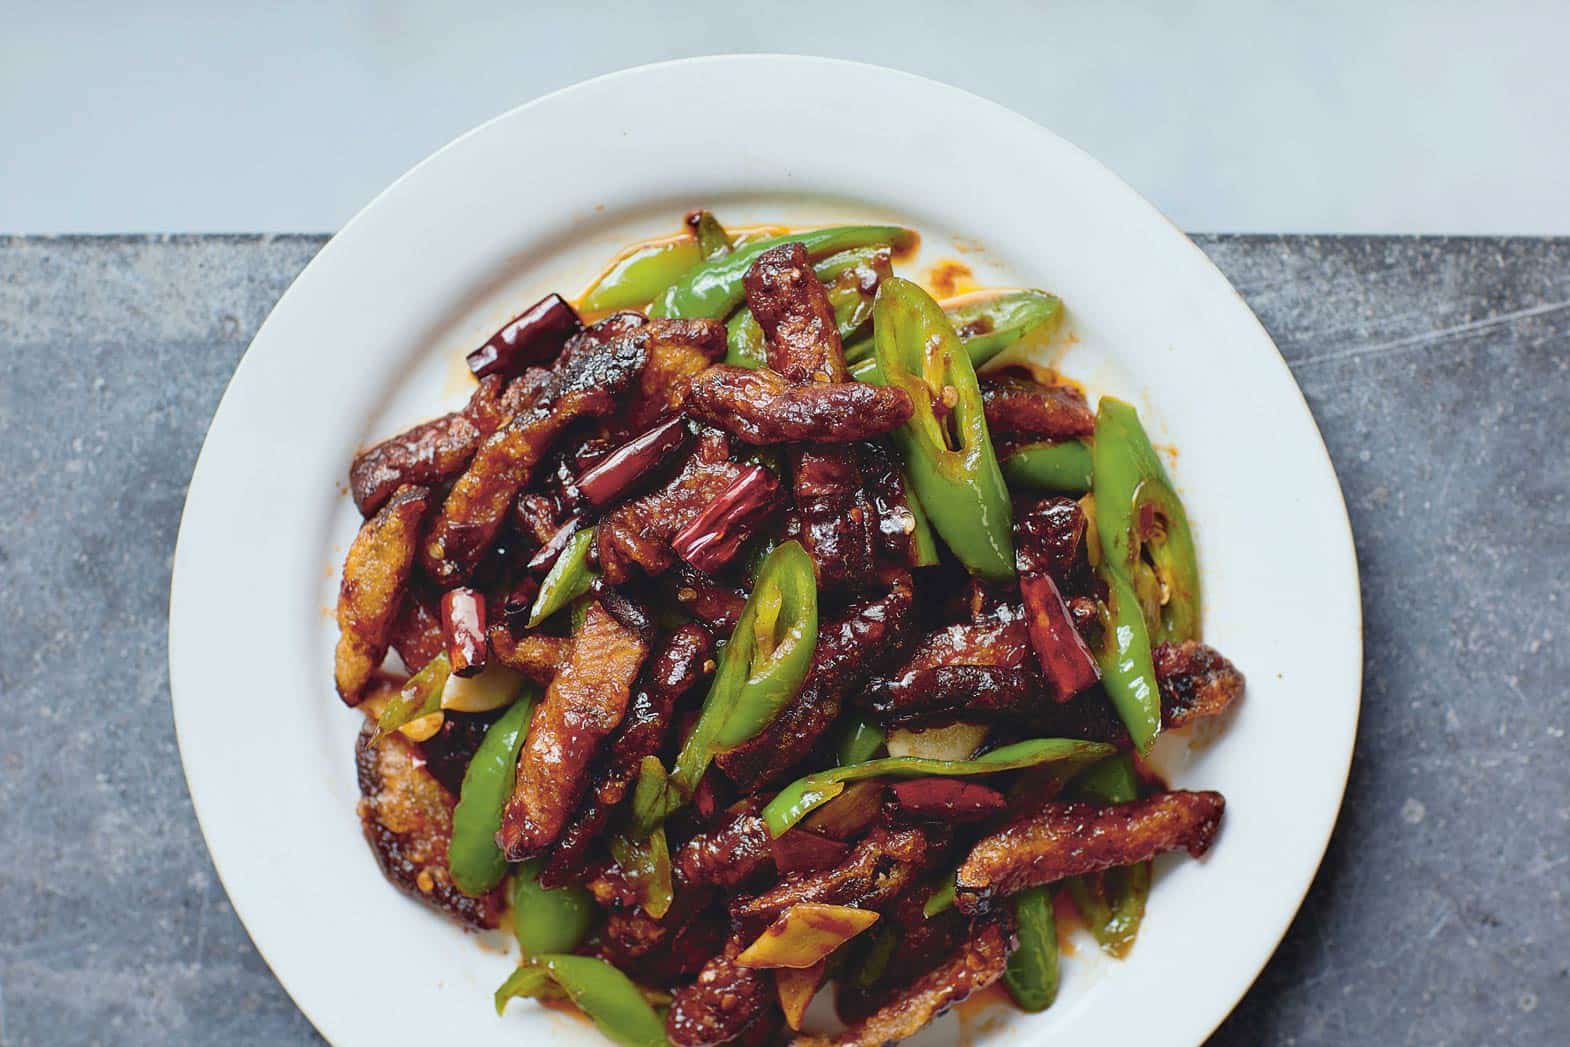 Dry-fried eels from Fuchsia Dunlop's cookbook Food of Sichuan